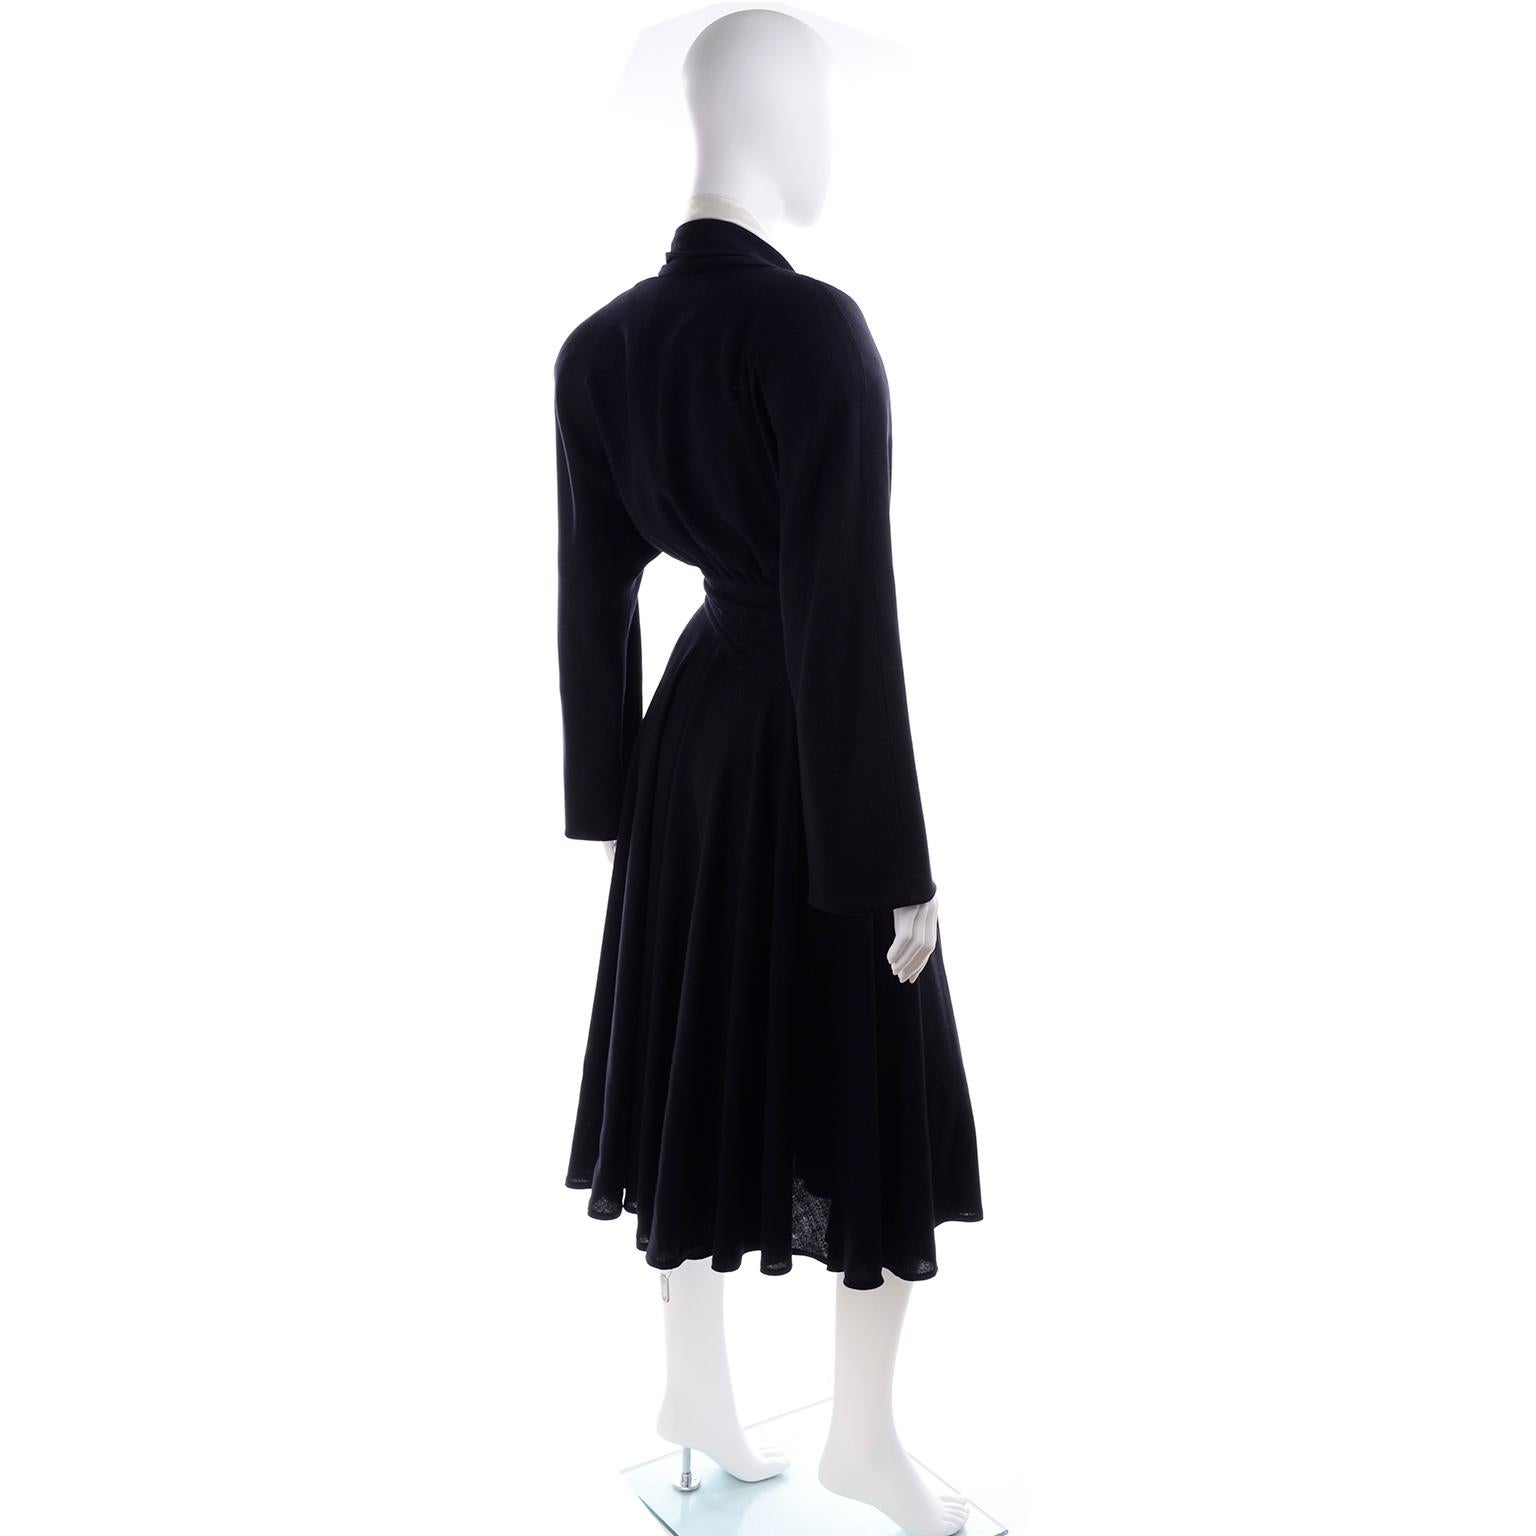 Black Deadstock Wayne Clark Couture Vintage Wool 1980s Dress New With Original Tags For Sale